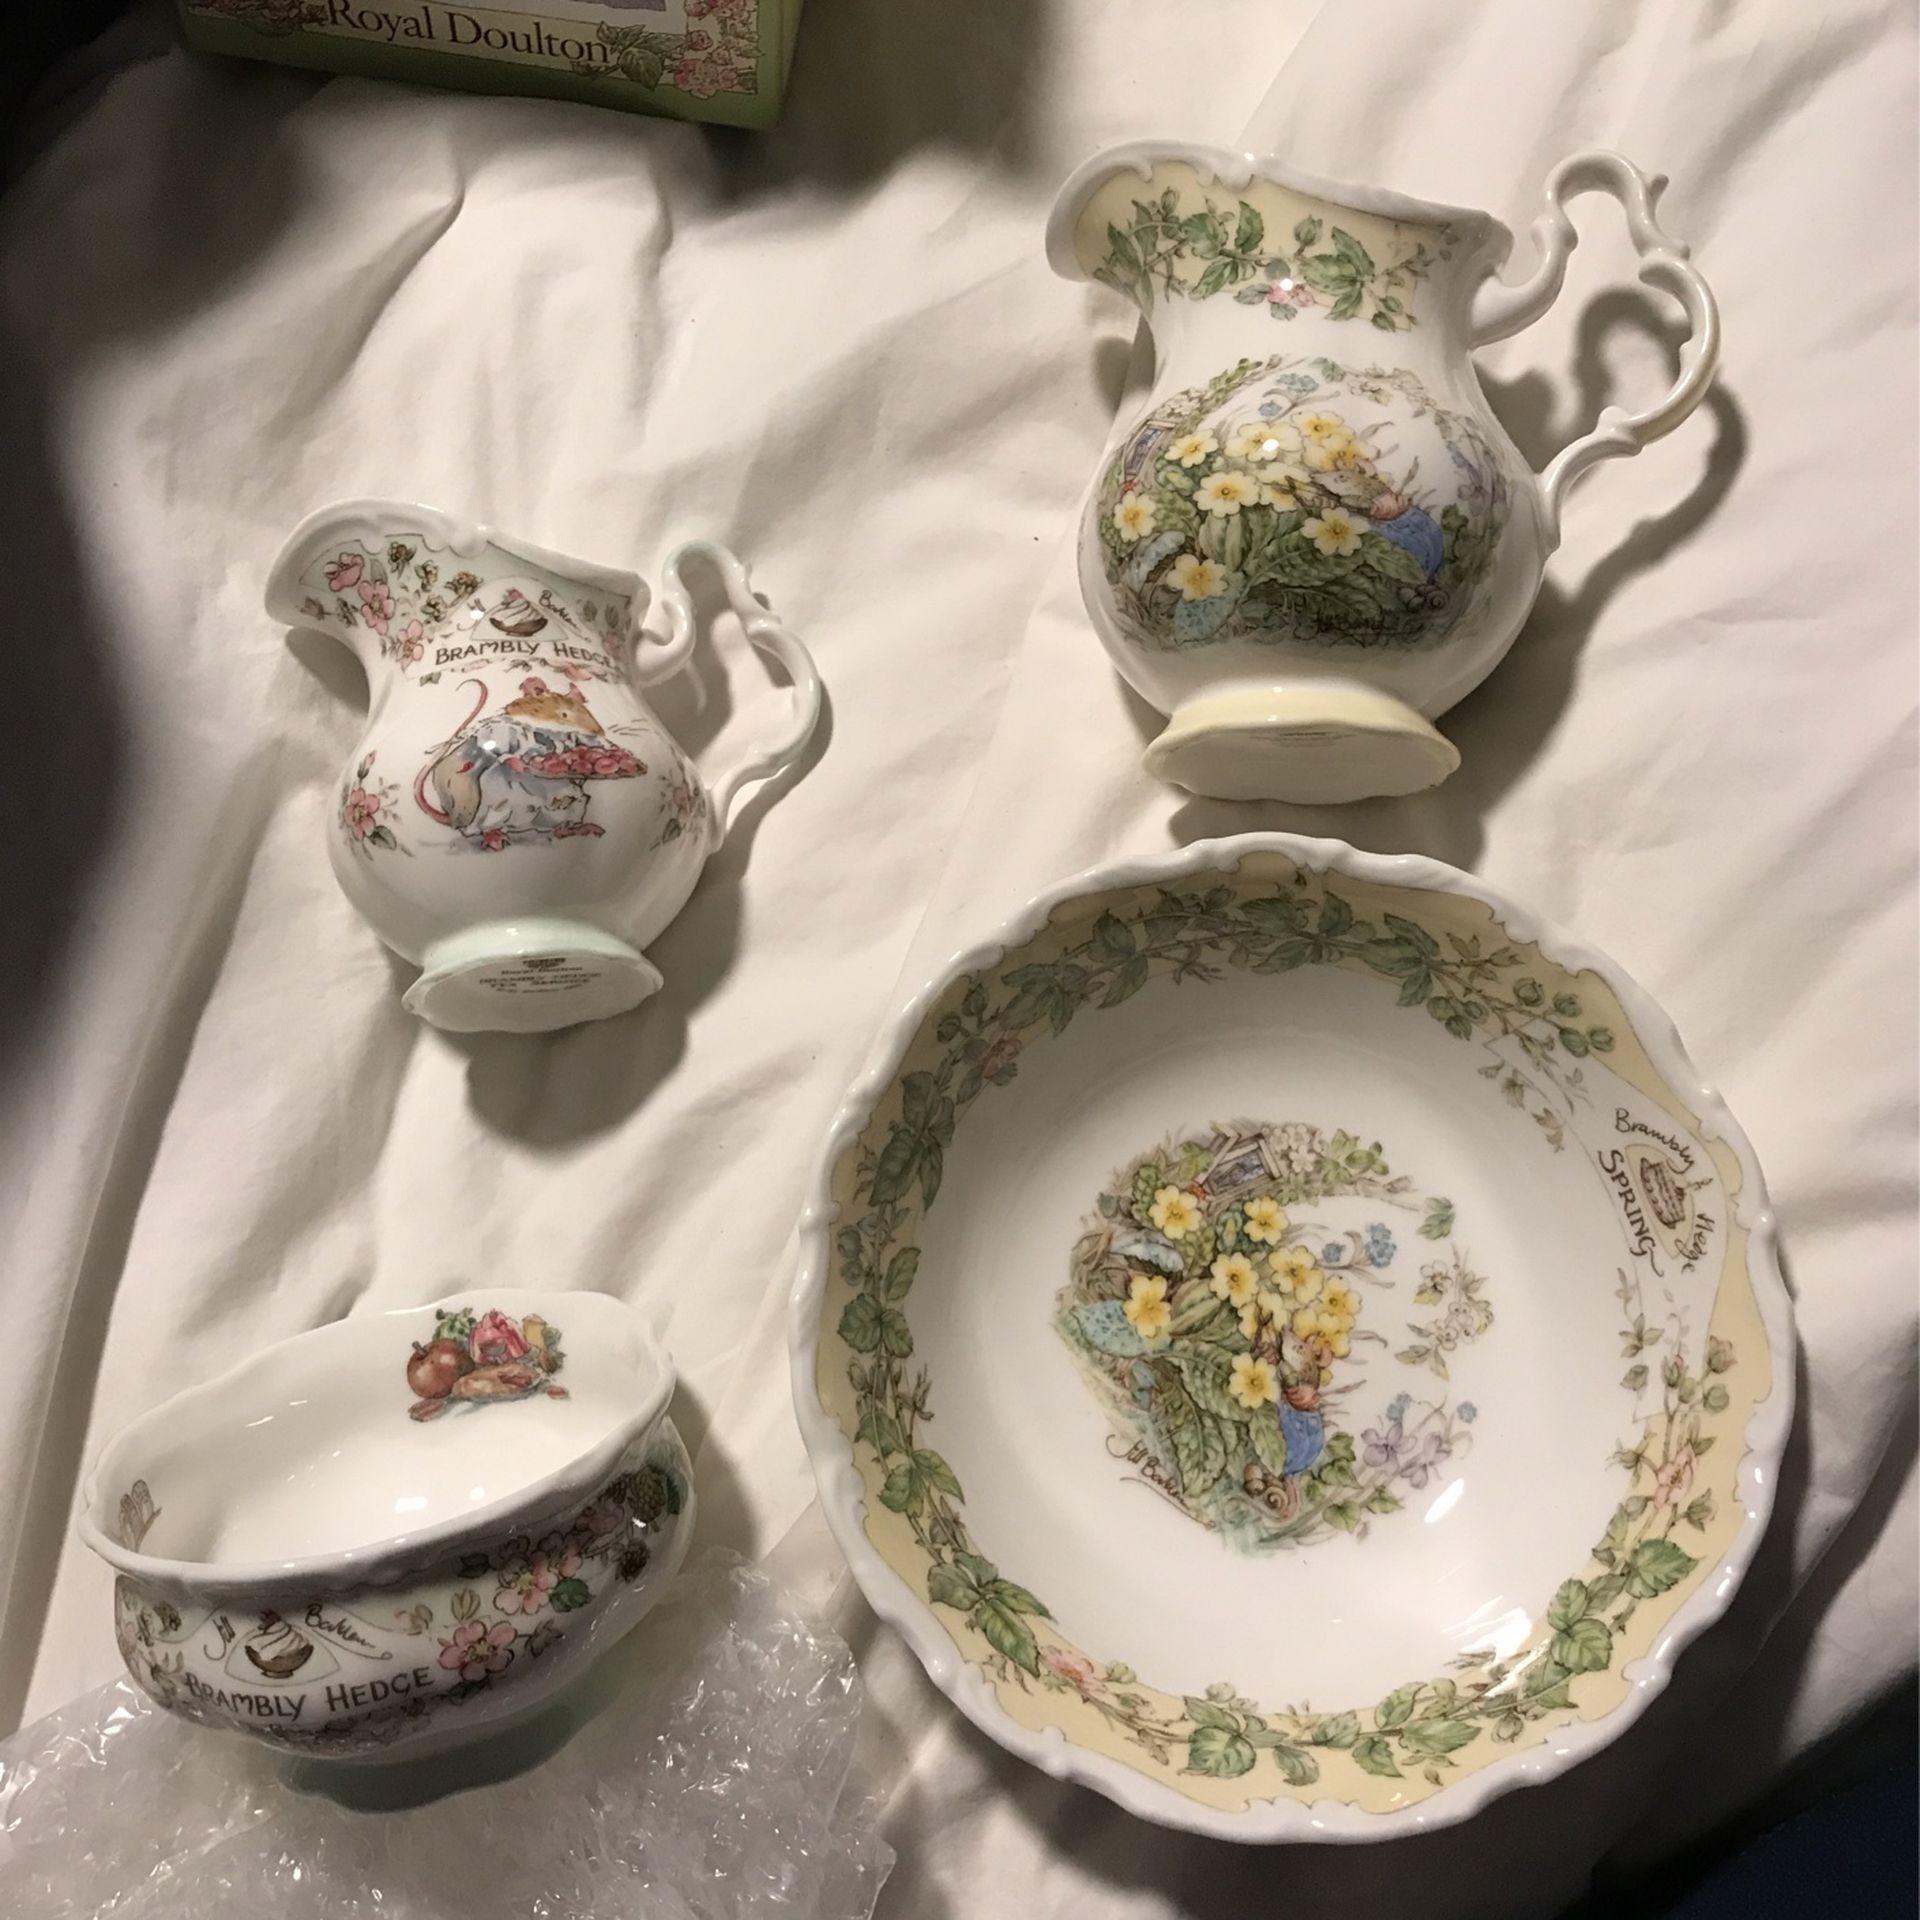 Brambley Hedge Royal Doulton  Spring 1991 Bowl And Pitcher And 1985 Tea Service With Boxes